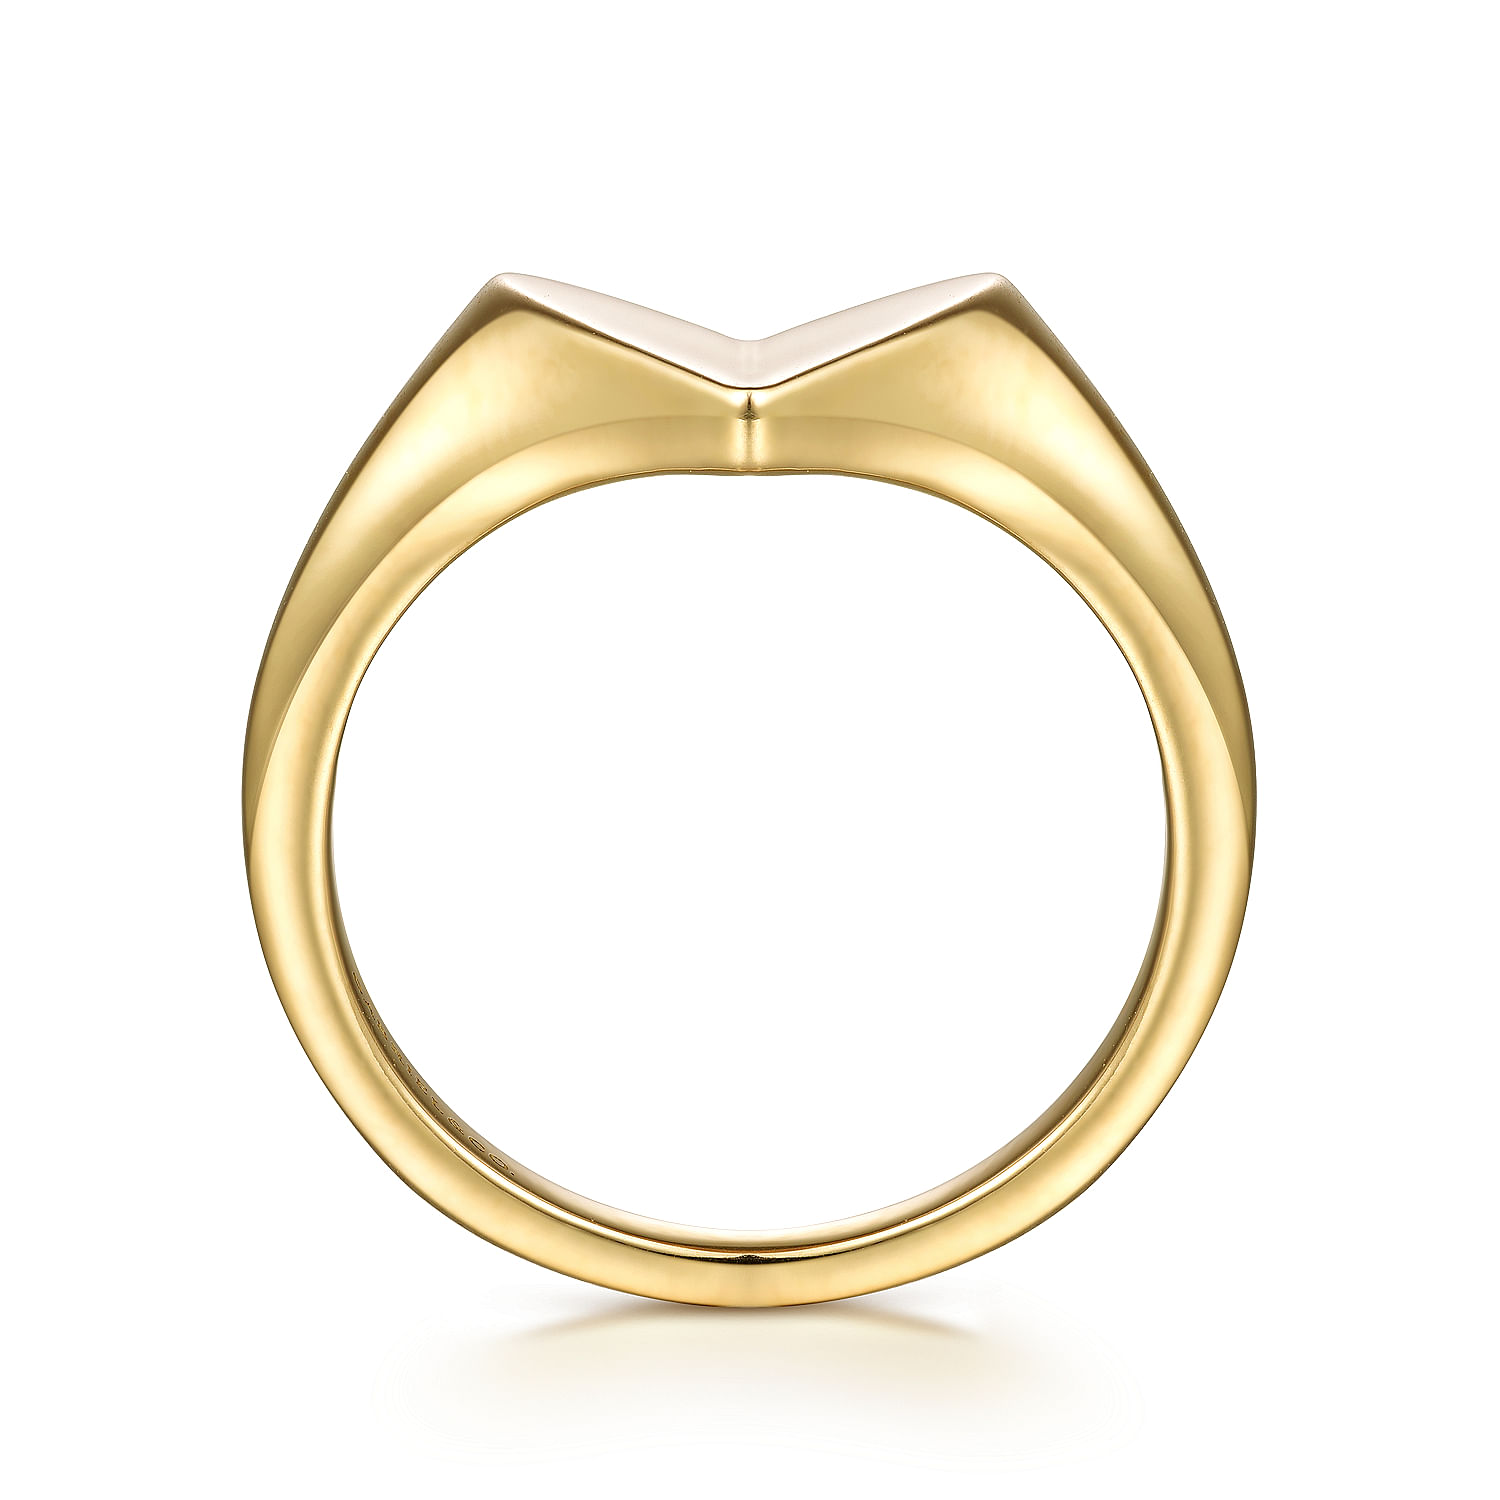 14K Yellow Gold Engravable Heart Ring